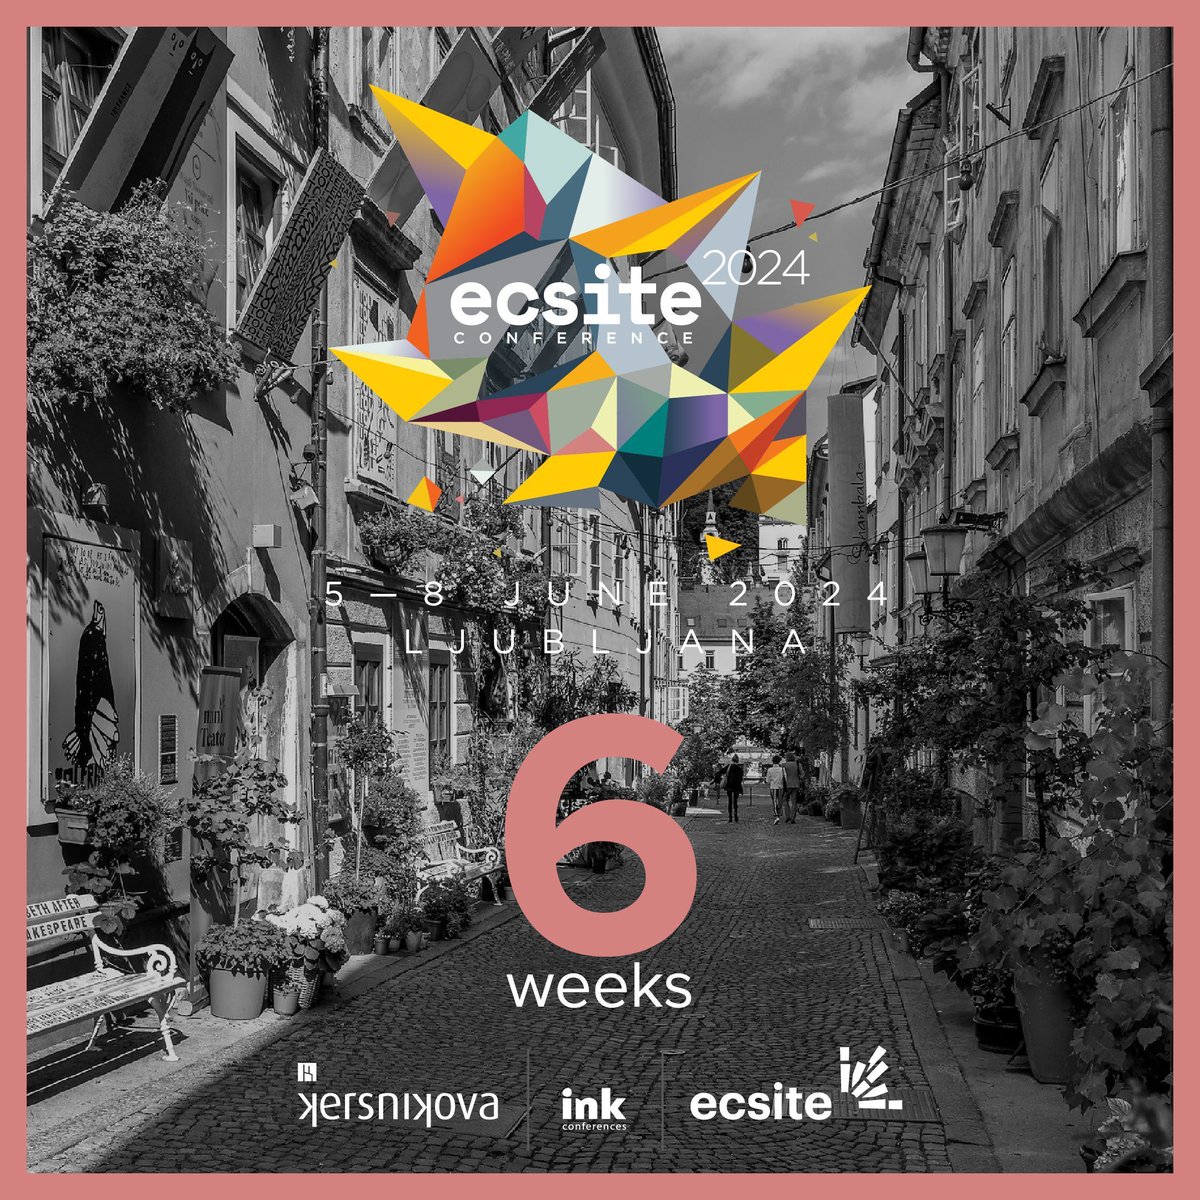 📢 With just 6 weeks left until #Ecsite2024, seize the opportunity to connect with fellow science communication enthusiasts, share insights, and contribute to the field! Join us 5-8 June in Ljubljana, Slovenia ➡️ buff.ly/3QRDqu3 #Ecsite #scicomm